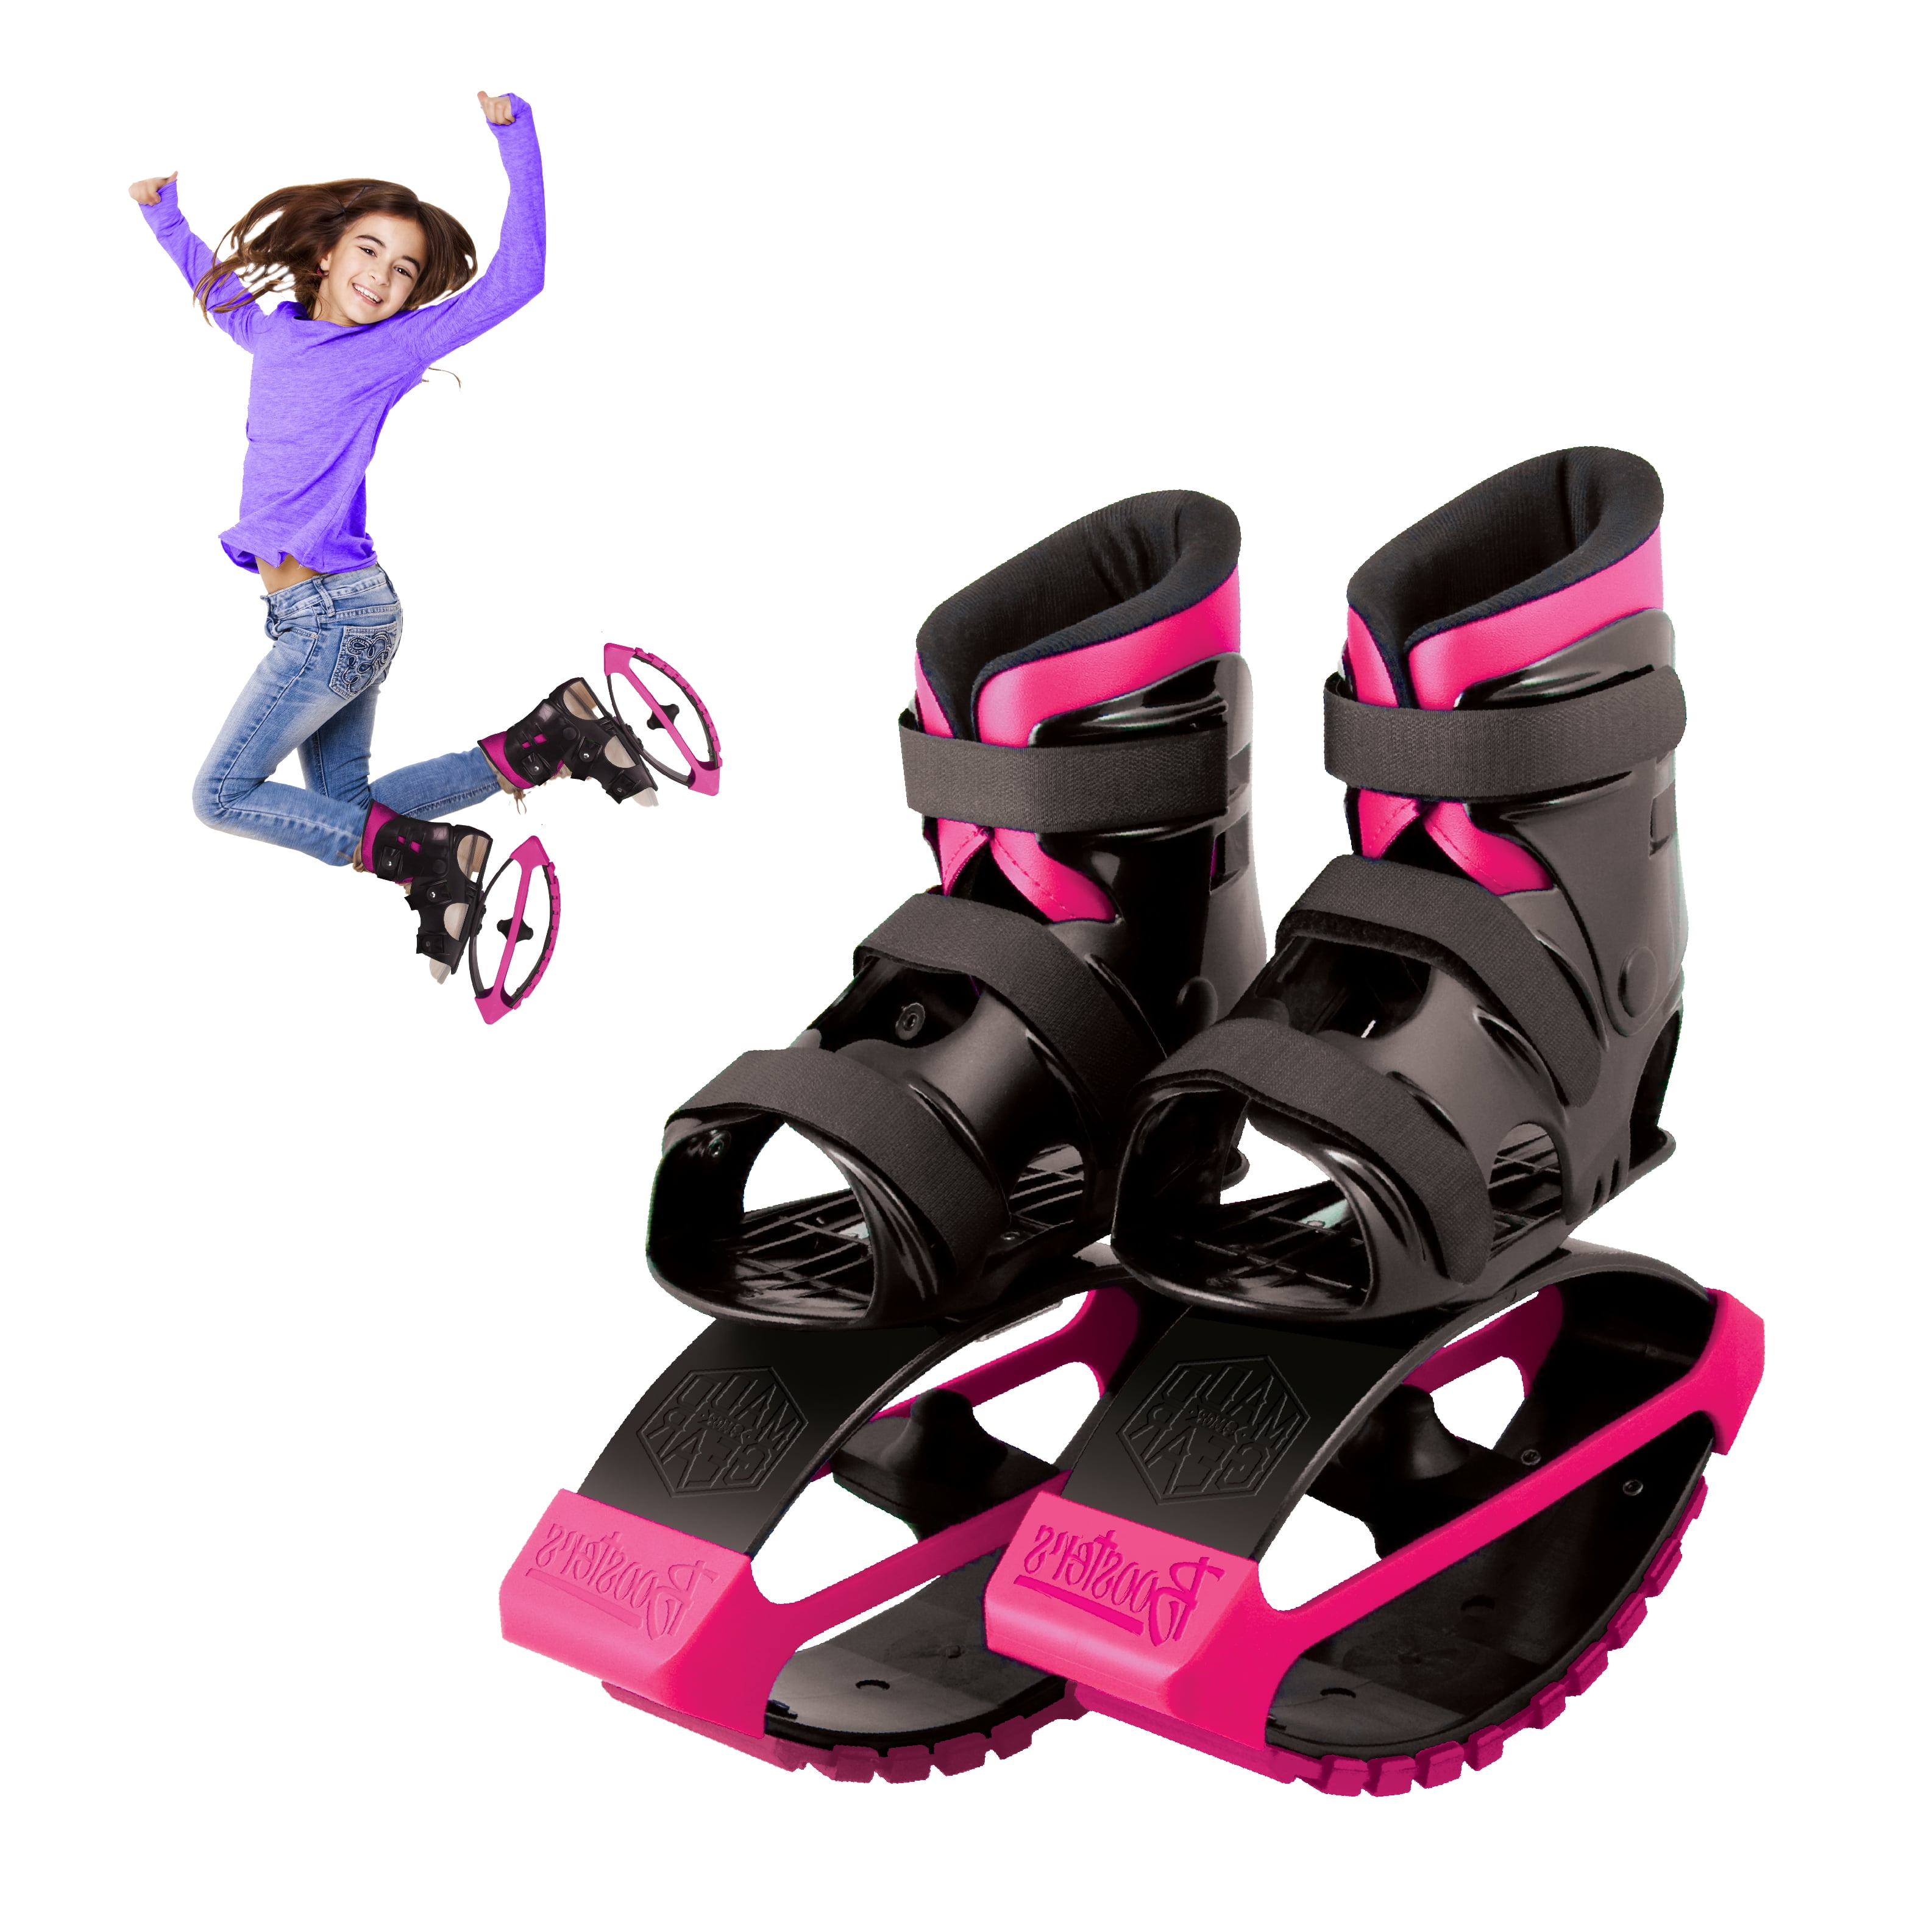 MADD GEAR – BOOST BOOTS – Kids Jumping Shoes – Black Purple – Suites Boys &  Girls Ages 5+ - Max User Weight 88lbs – 3 Year Manufacturer's Warranty –  Built to Last! Madd Gear Est. 2002 